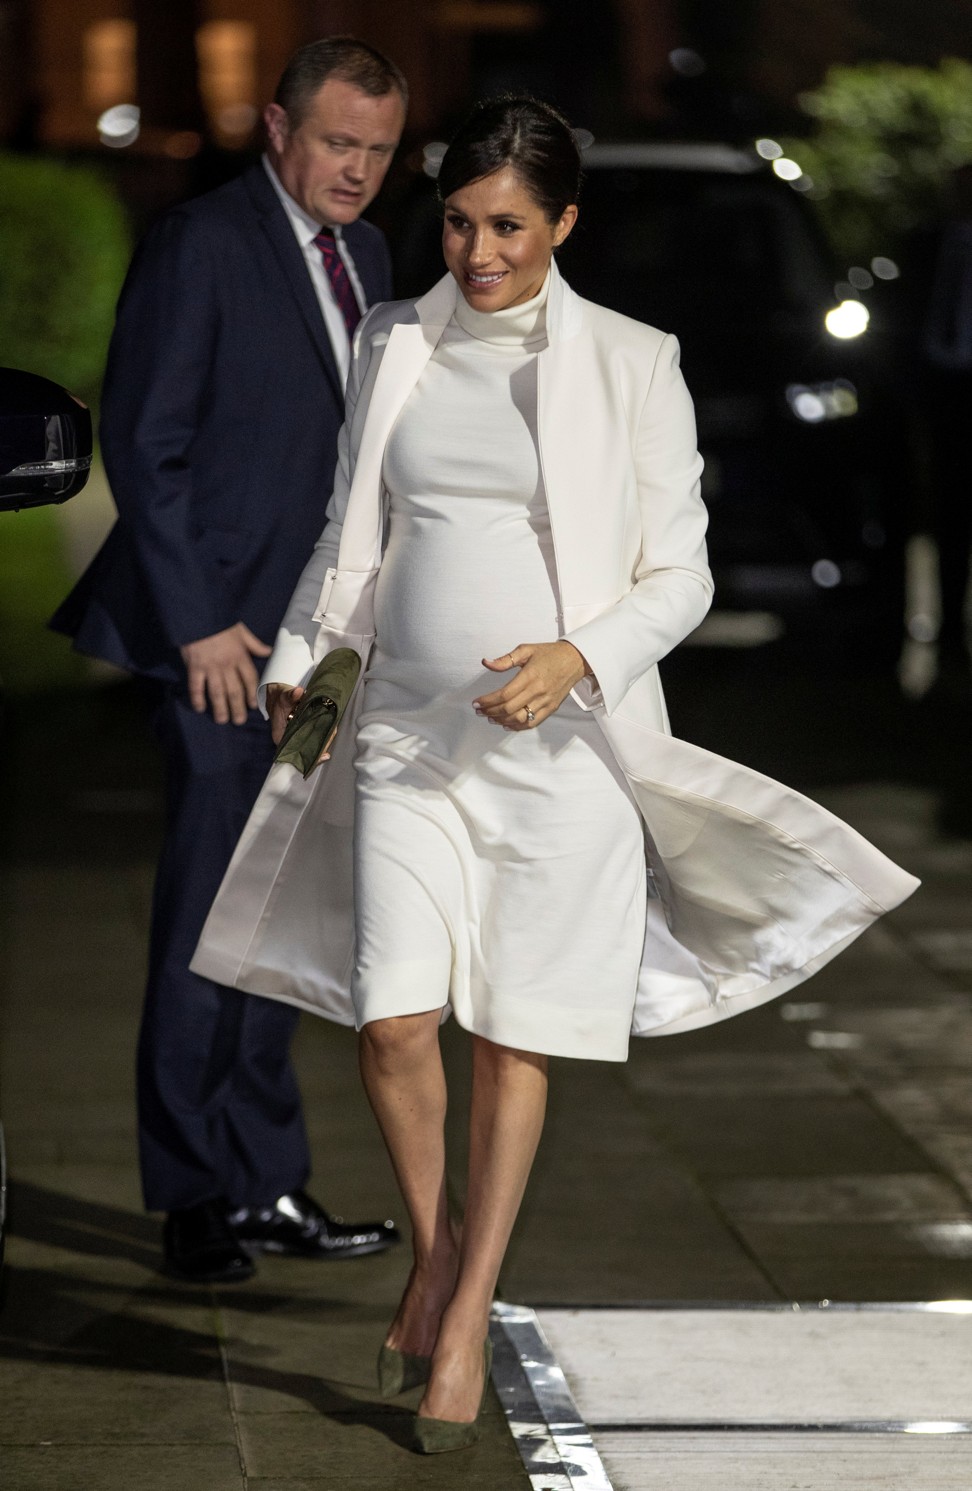 Meghan, Duchess of Sussex, remained busy carrying out official duties while she was pregnant. Photo: Reuters